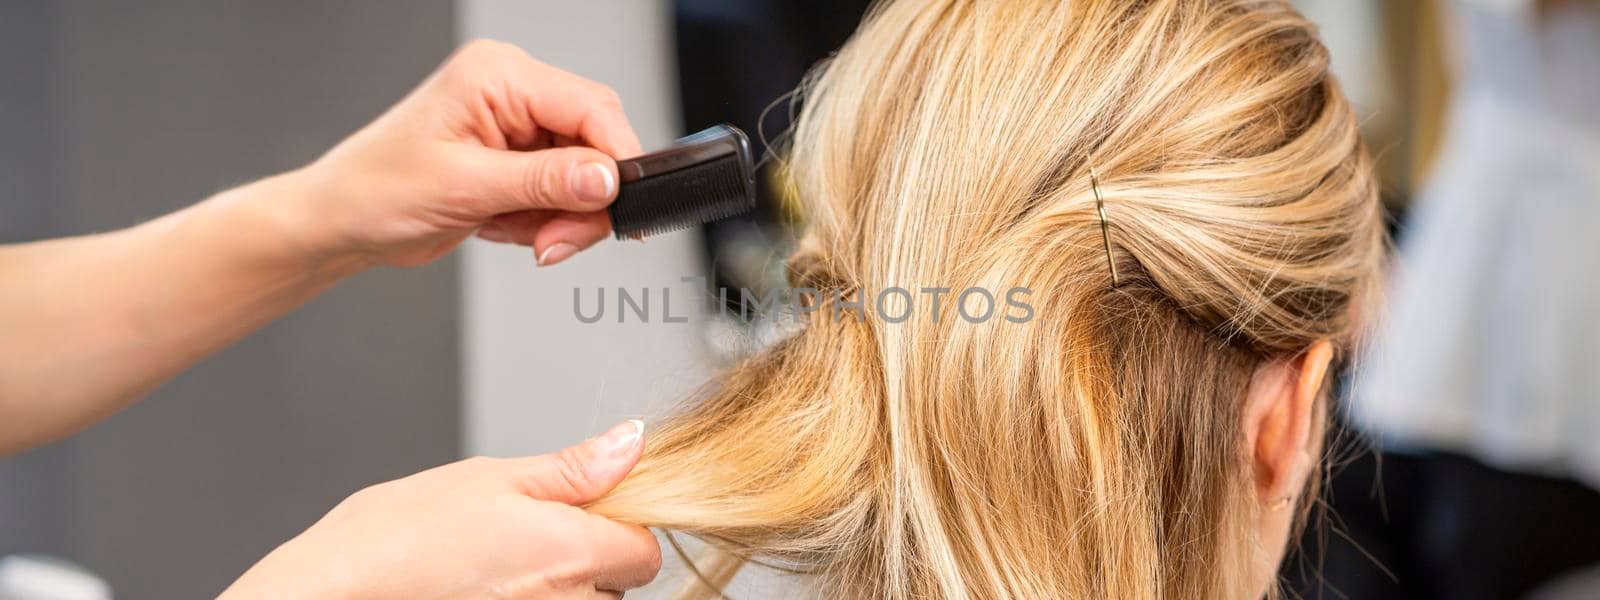 Rear View of a hairdresser combs blonde hair of the young woman in a beauty salon